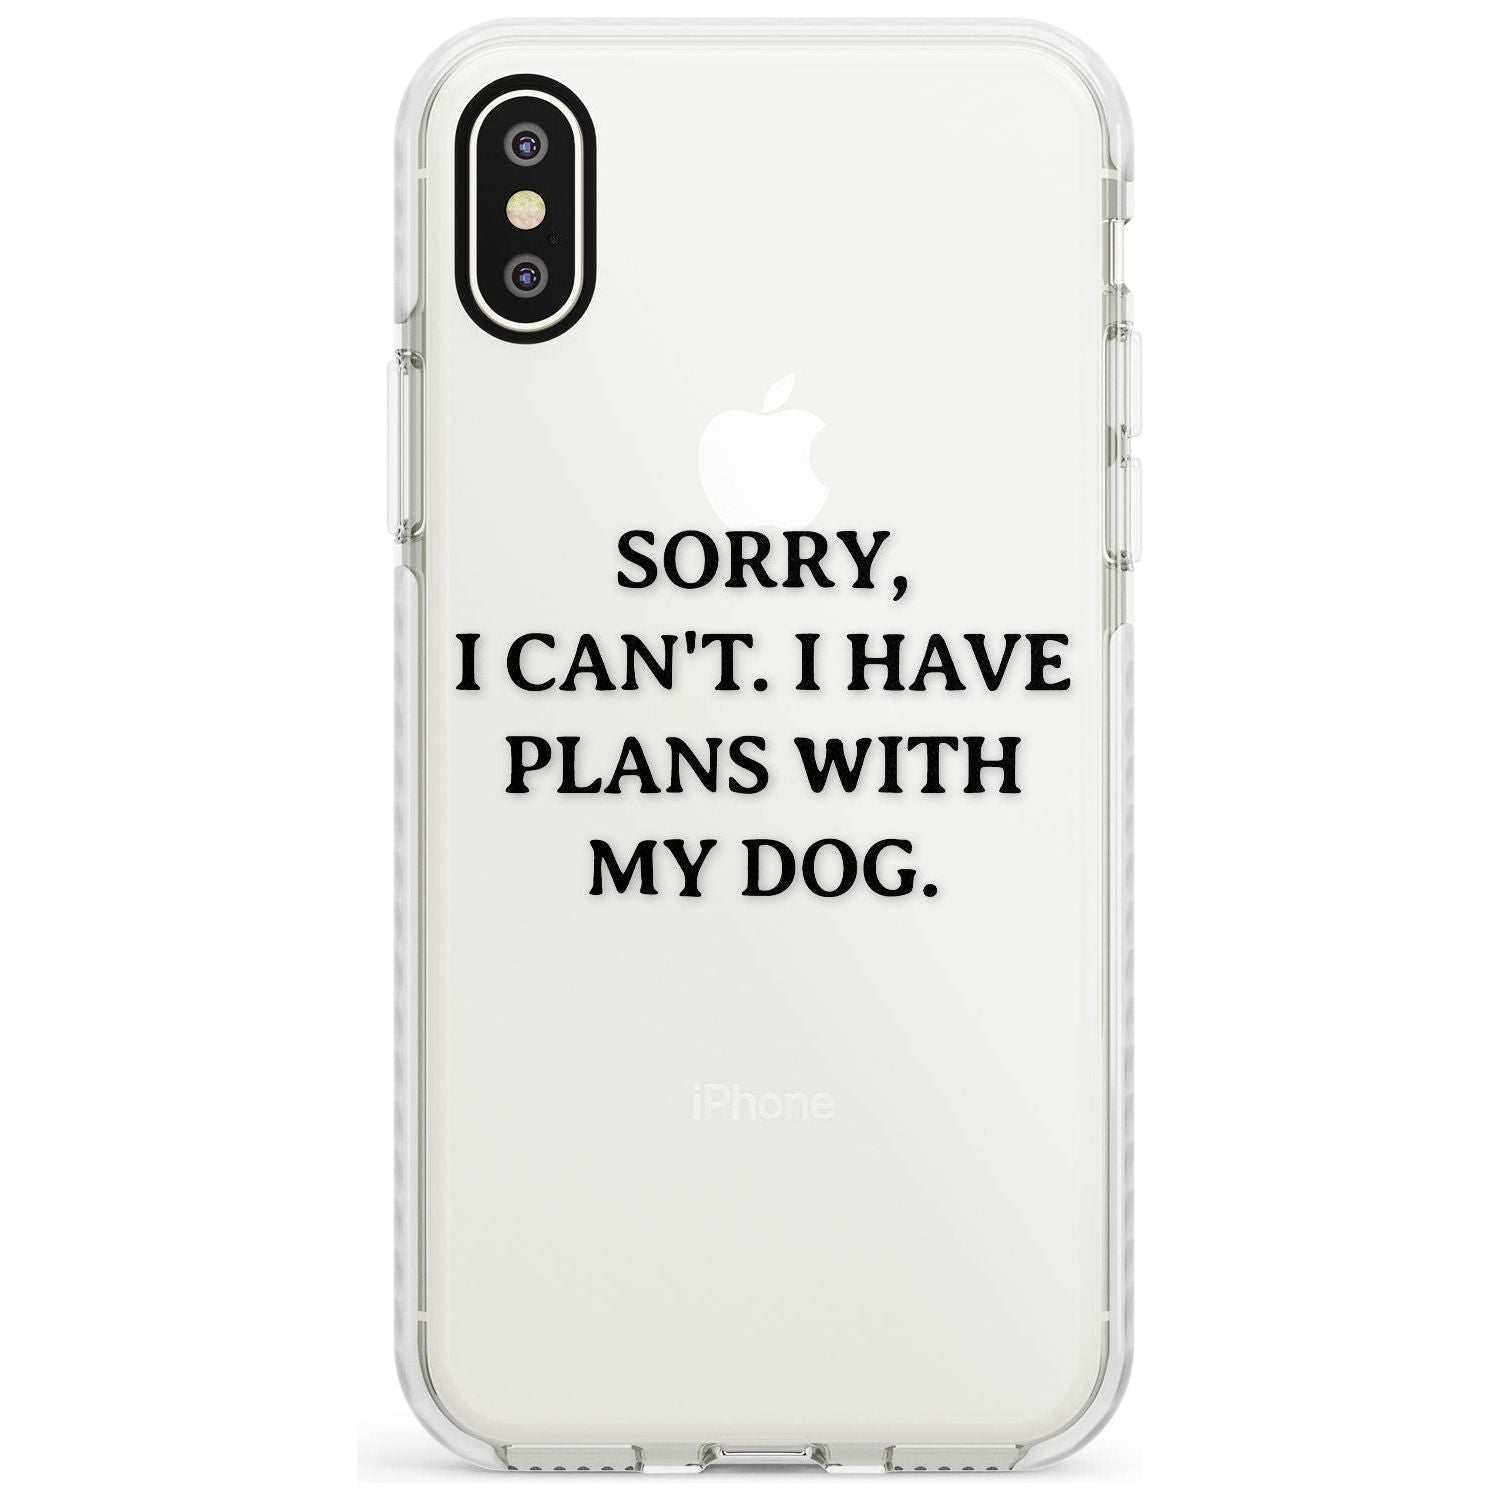 Plans with Dog Impact Phone Case for iPhone X XS Max XR